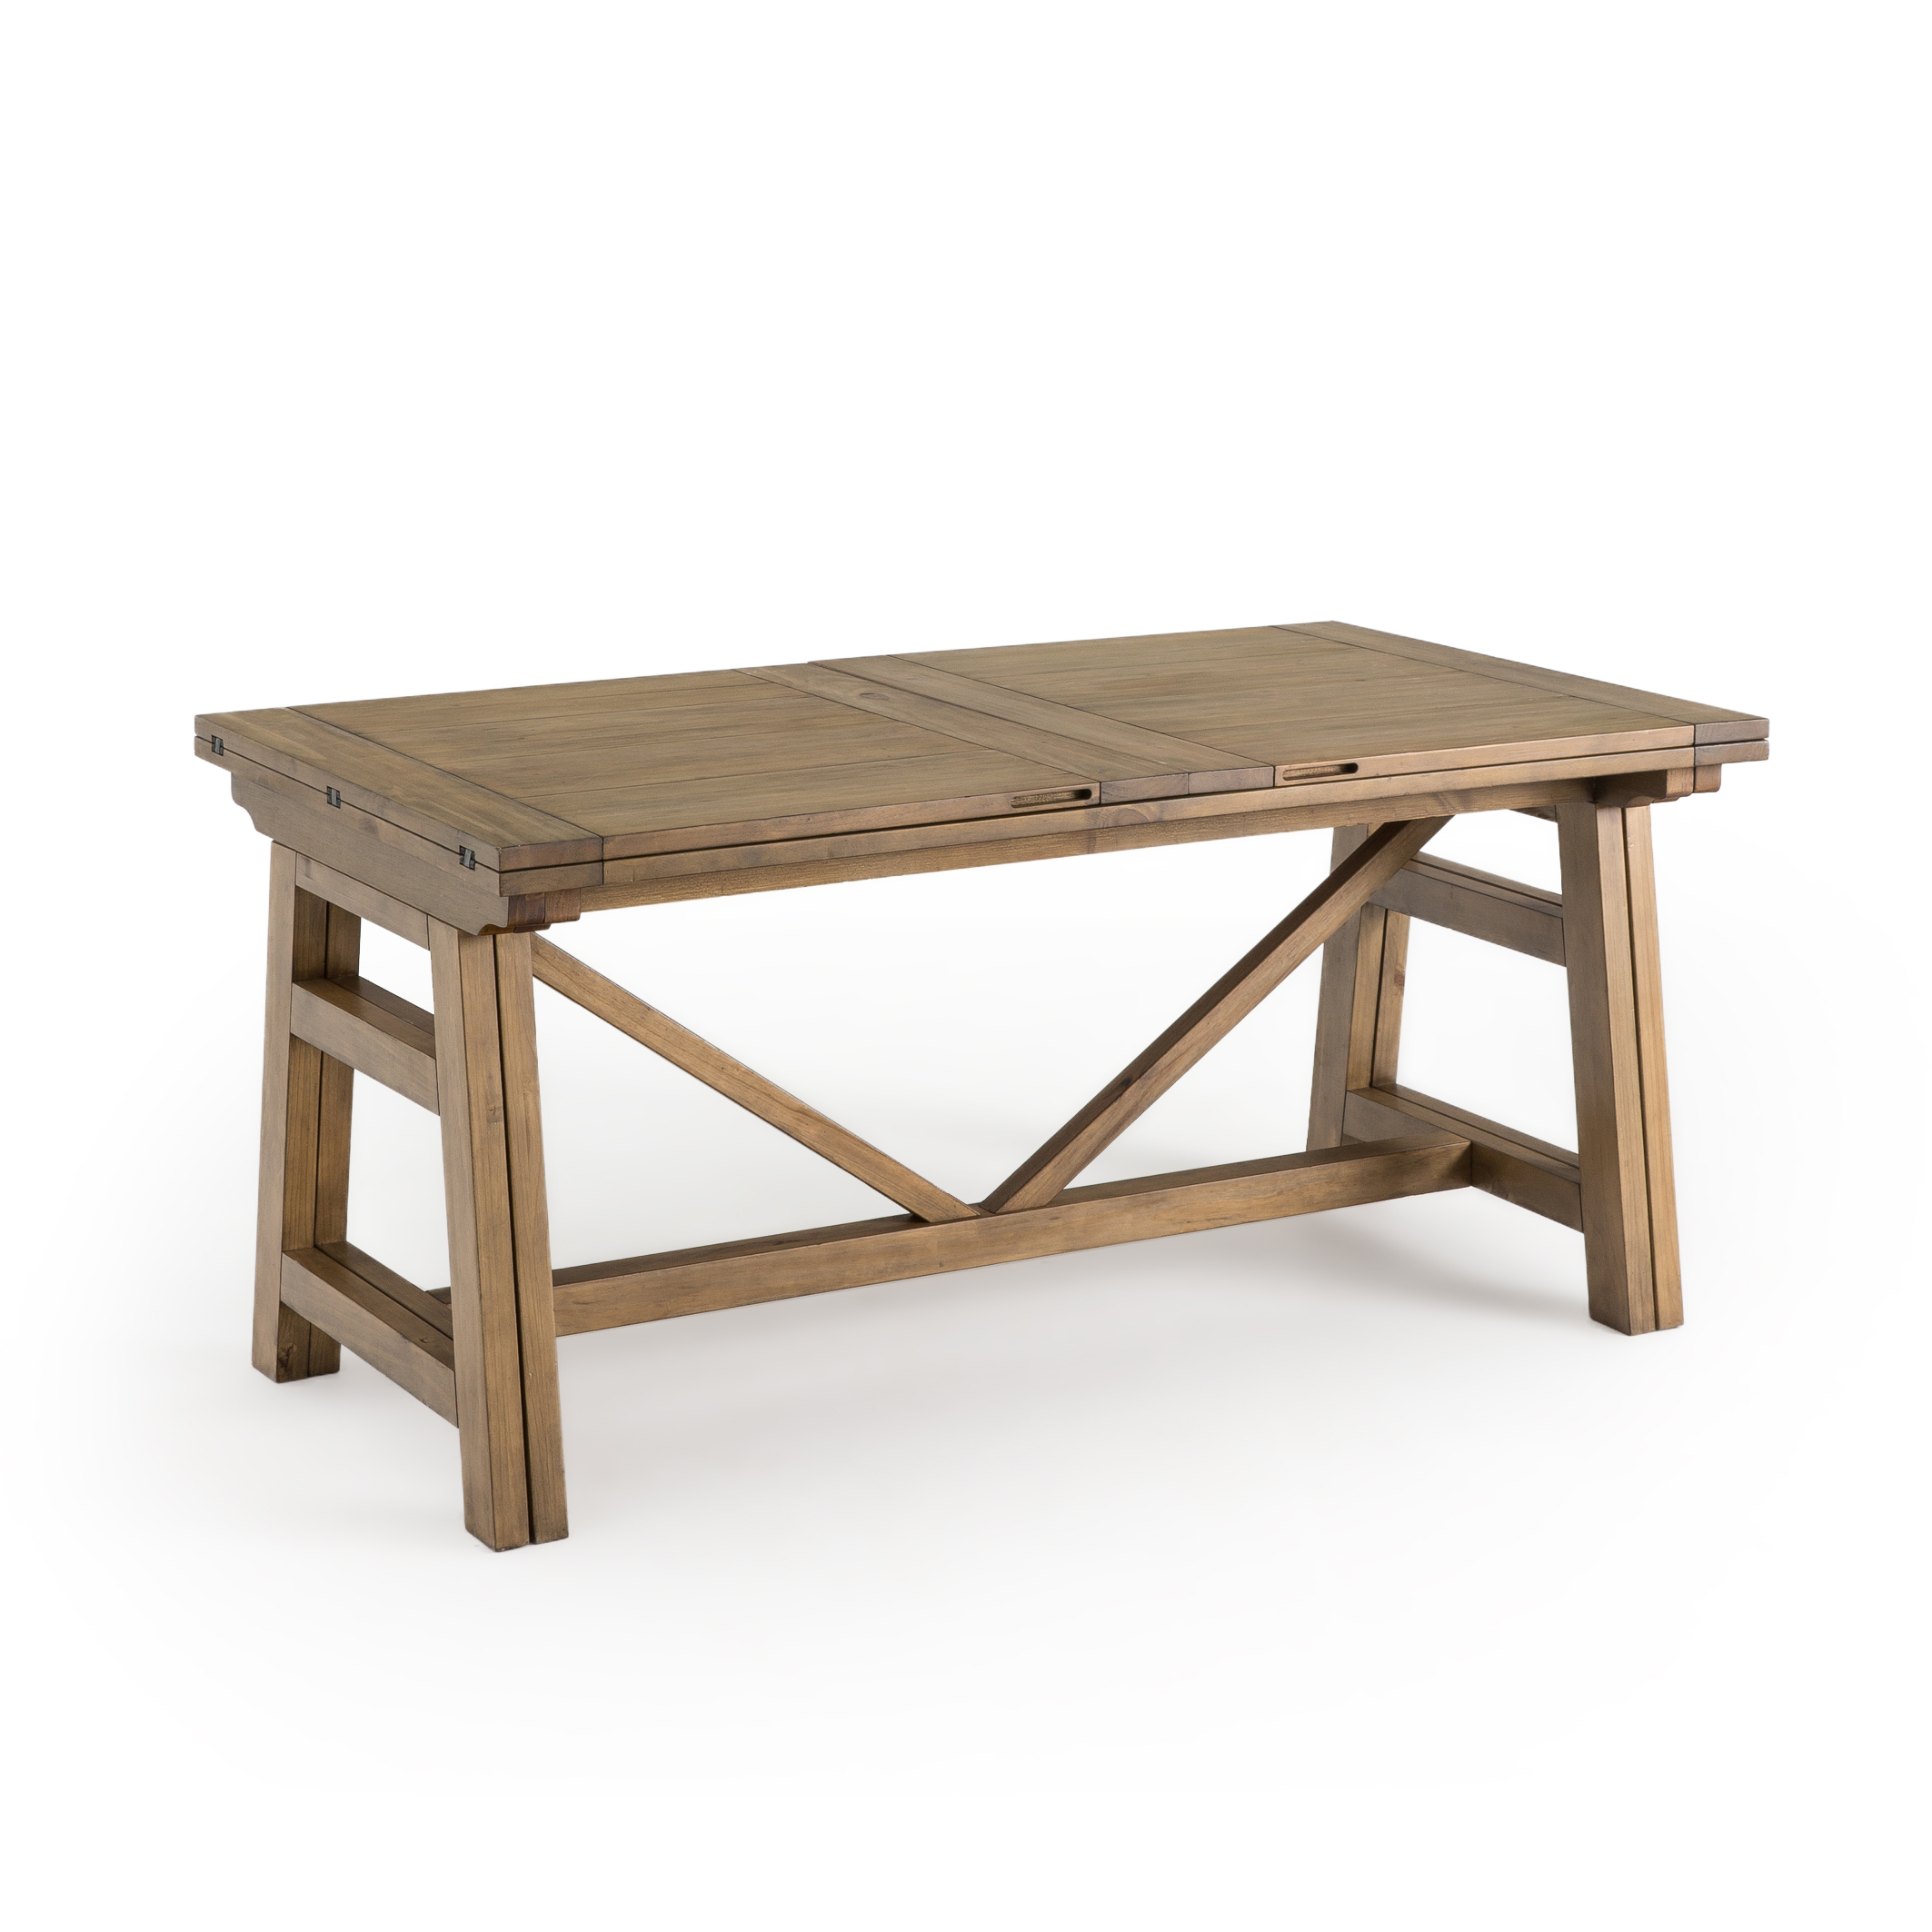 Wabi Solid Pine Extendable Dining Table, Seats 6-12